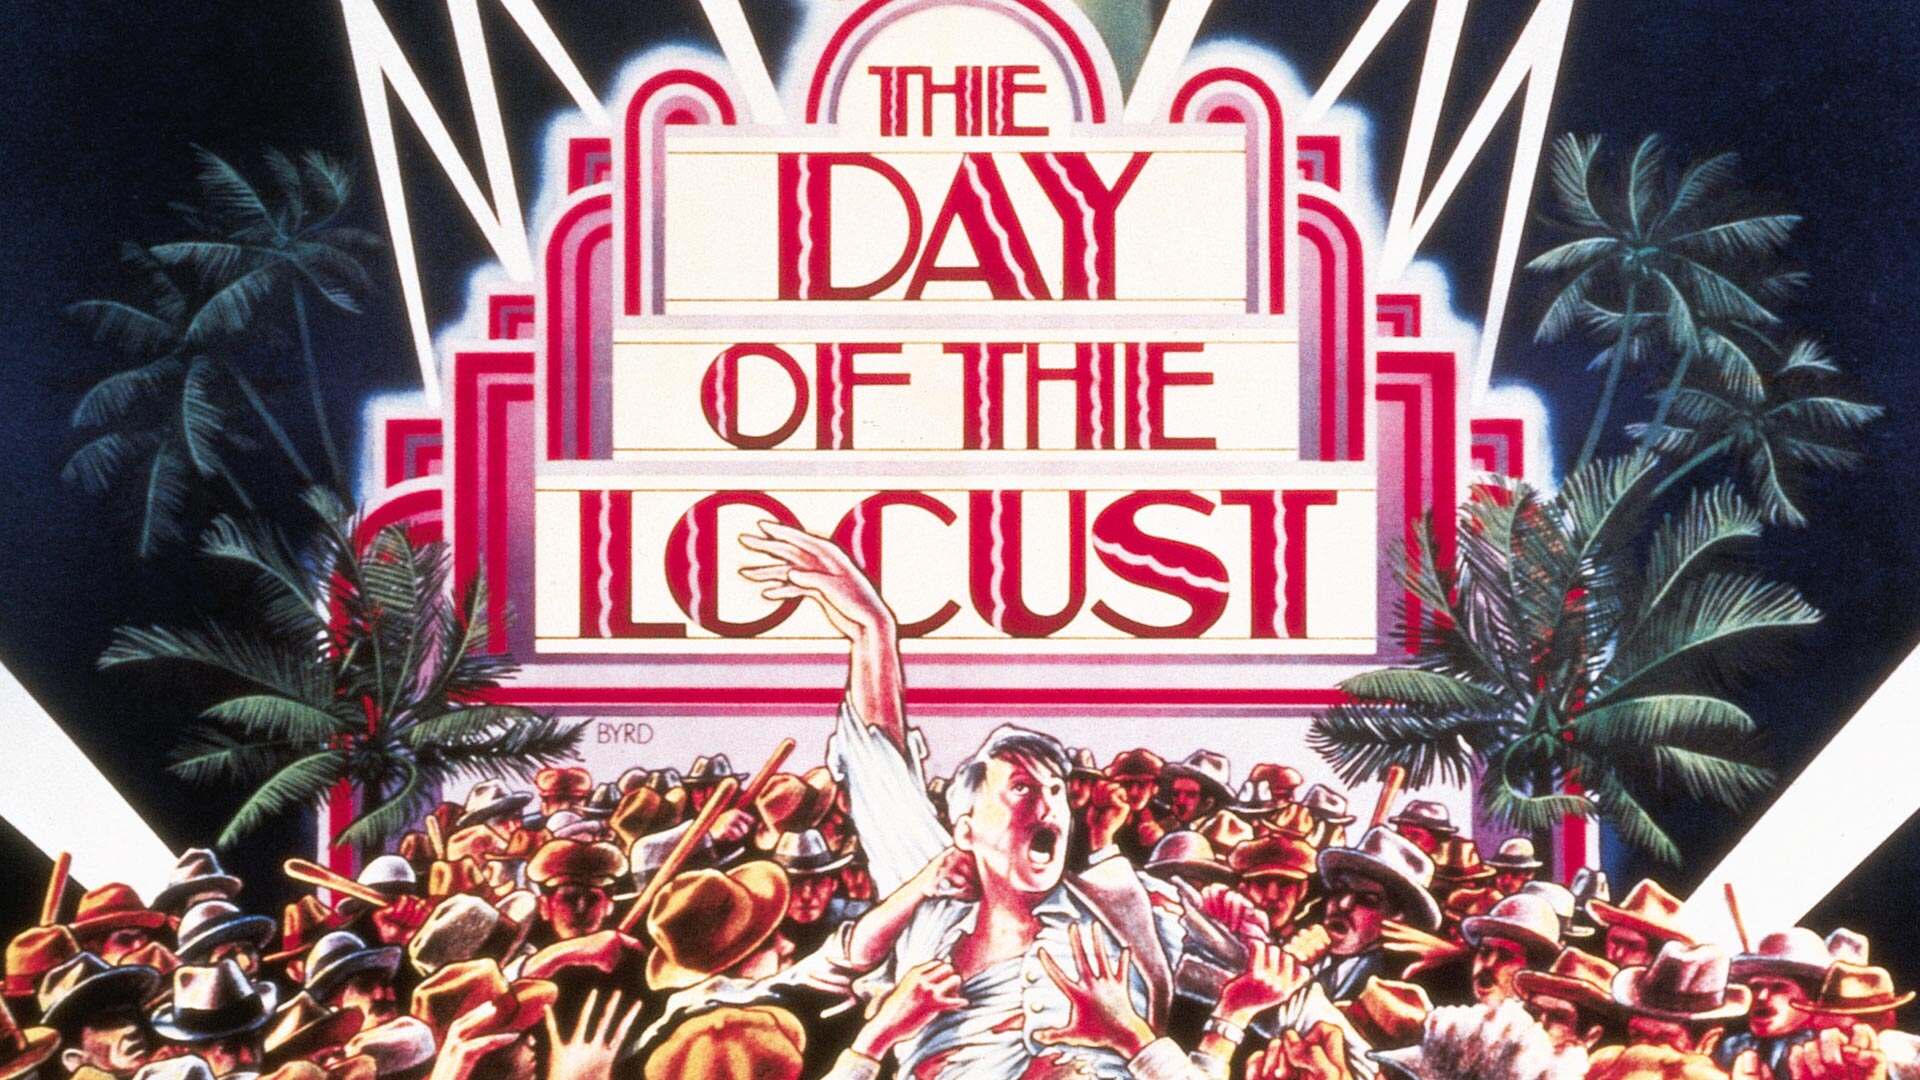 39-facts-about-the-movie-the-day-of-the-locust